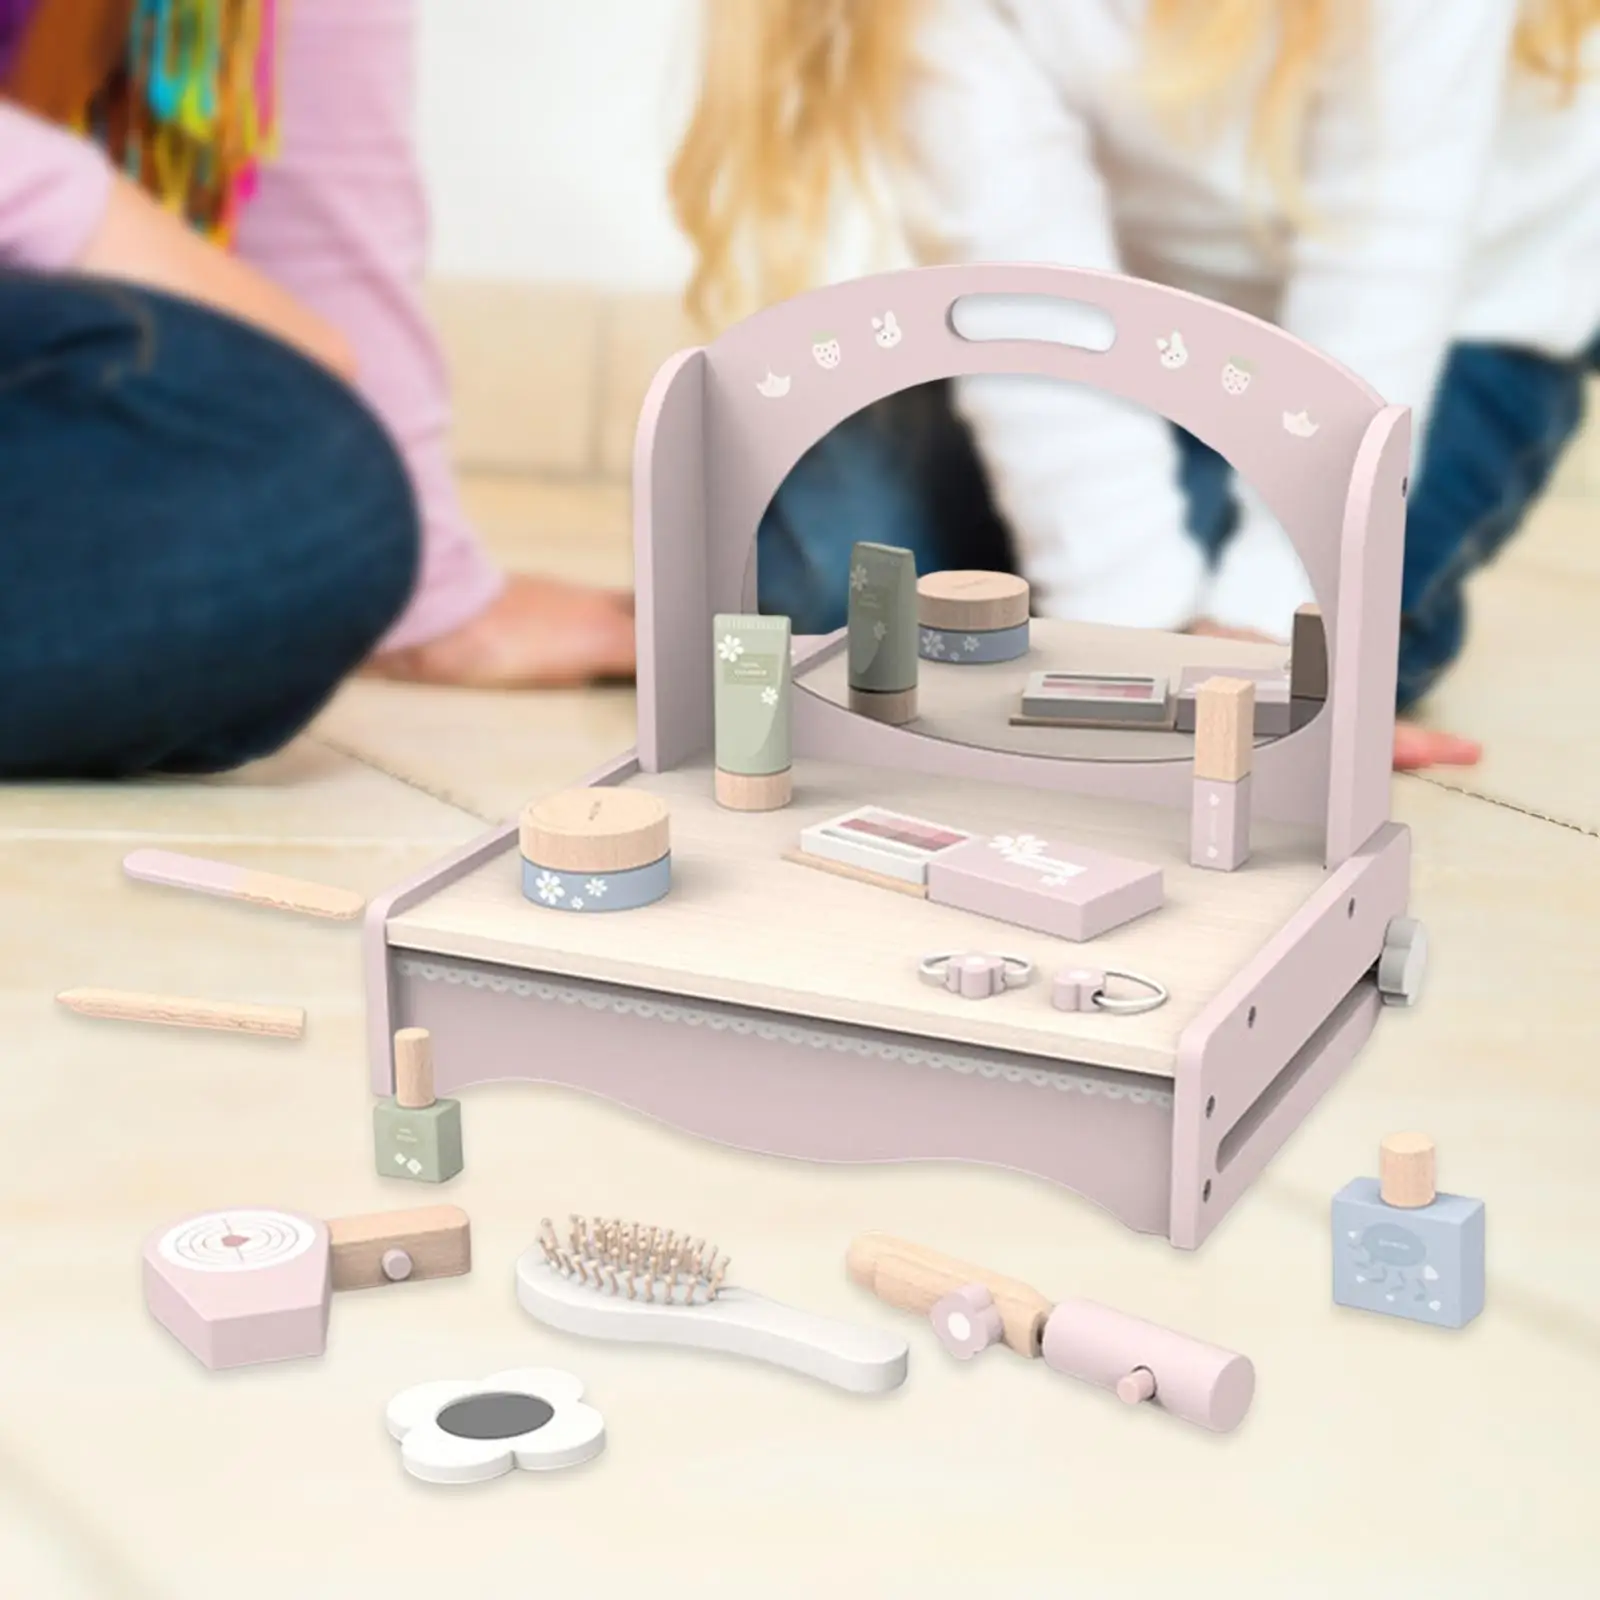 Wood Kids Makeup Sets with Pretend Makeup Accessories Kids Vanity Table Dress Table Toy for Game Role Play Interaction Activity